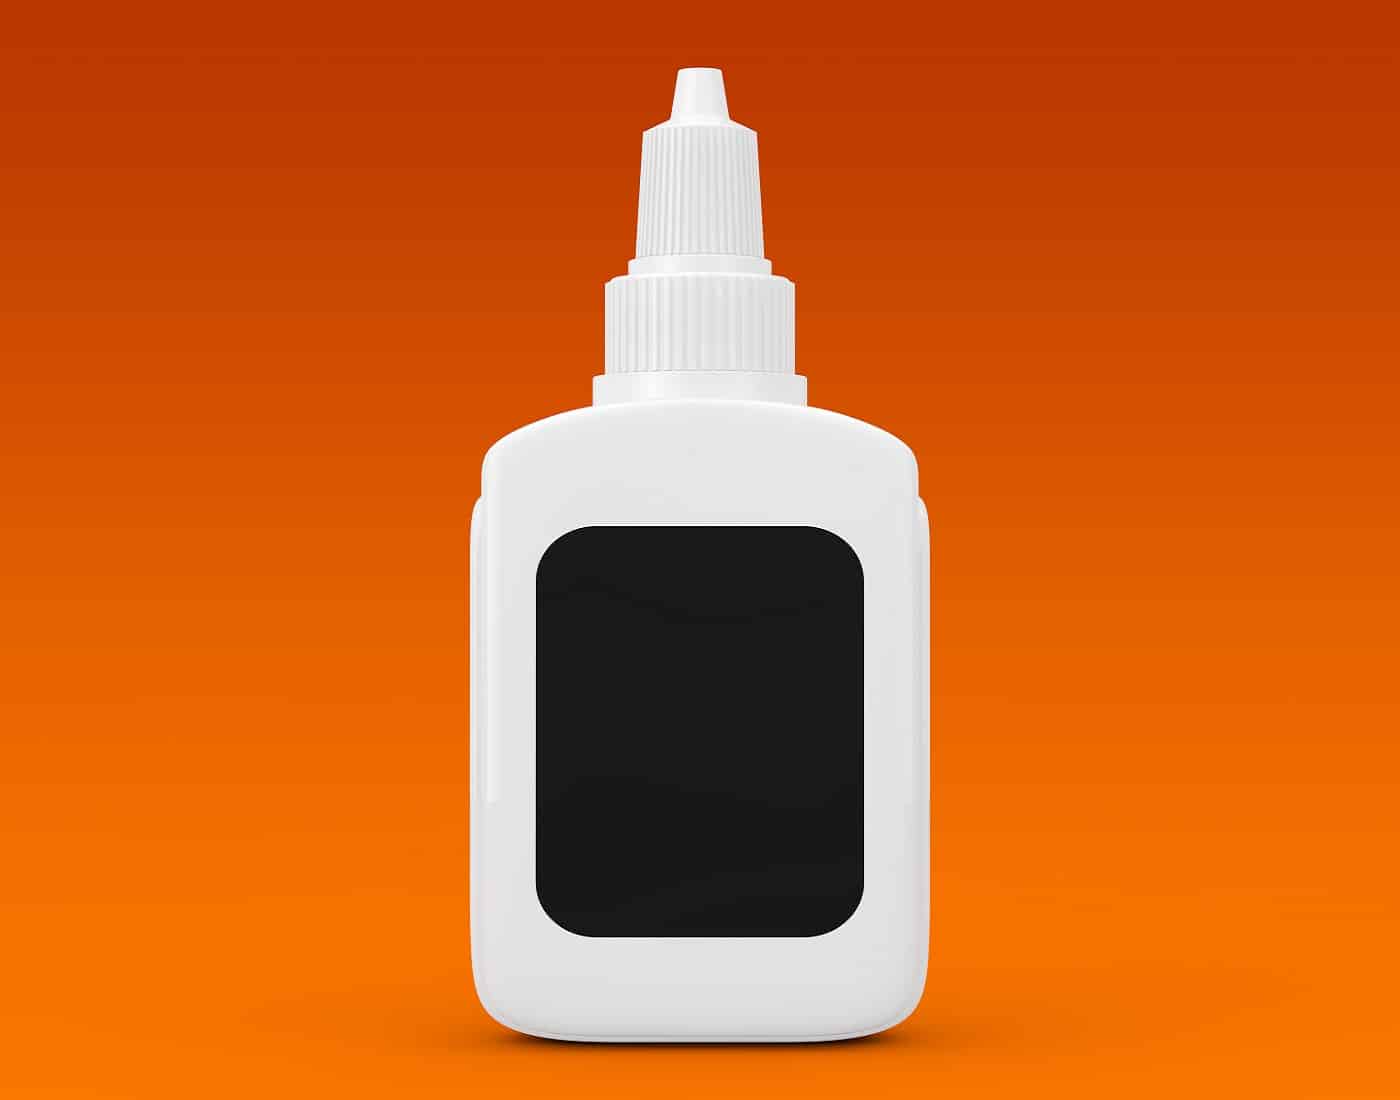 White Glue Bottle with Blank Black Label for Your Design on an orange background. 3d Rendering